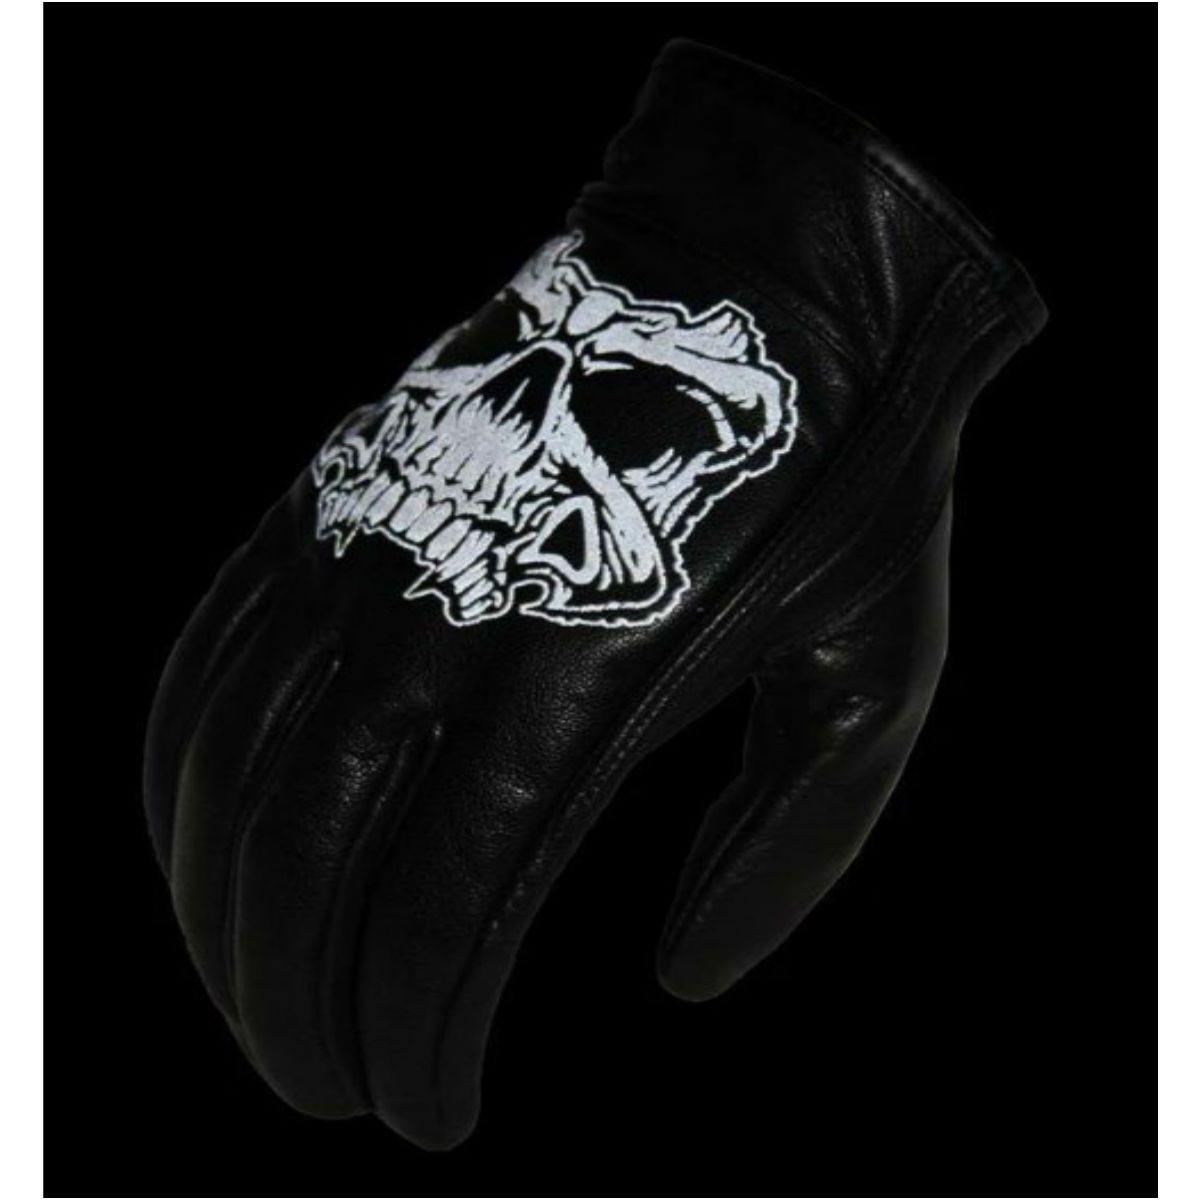 First Manufacturing Reflective Skull Motorcycle Leather Gloves - American Legend Rider